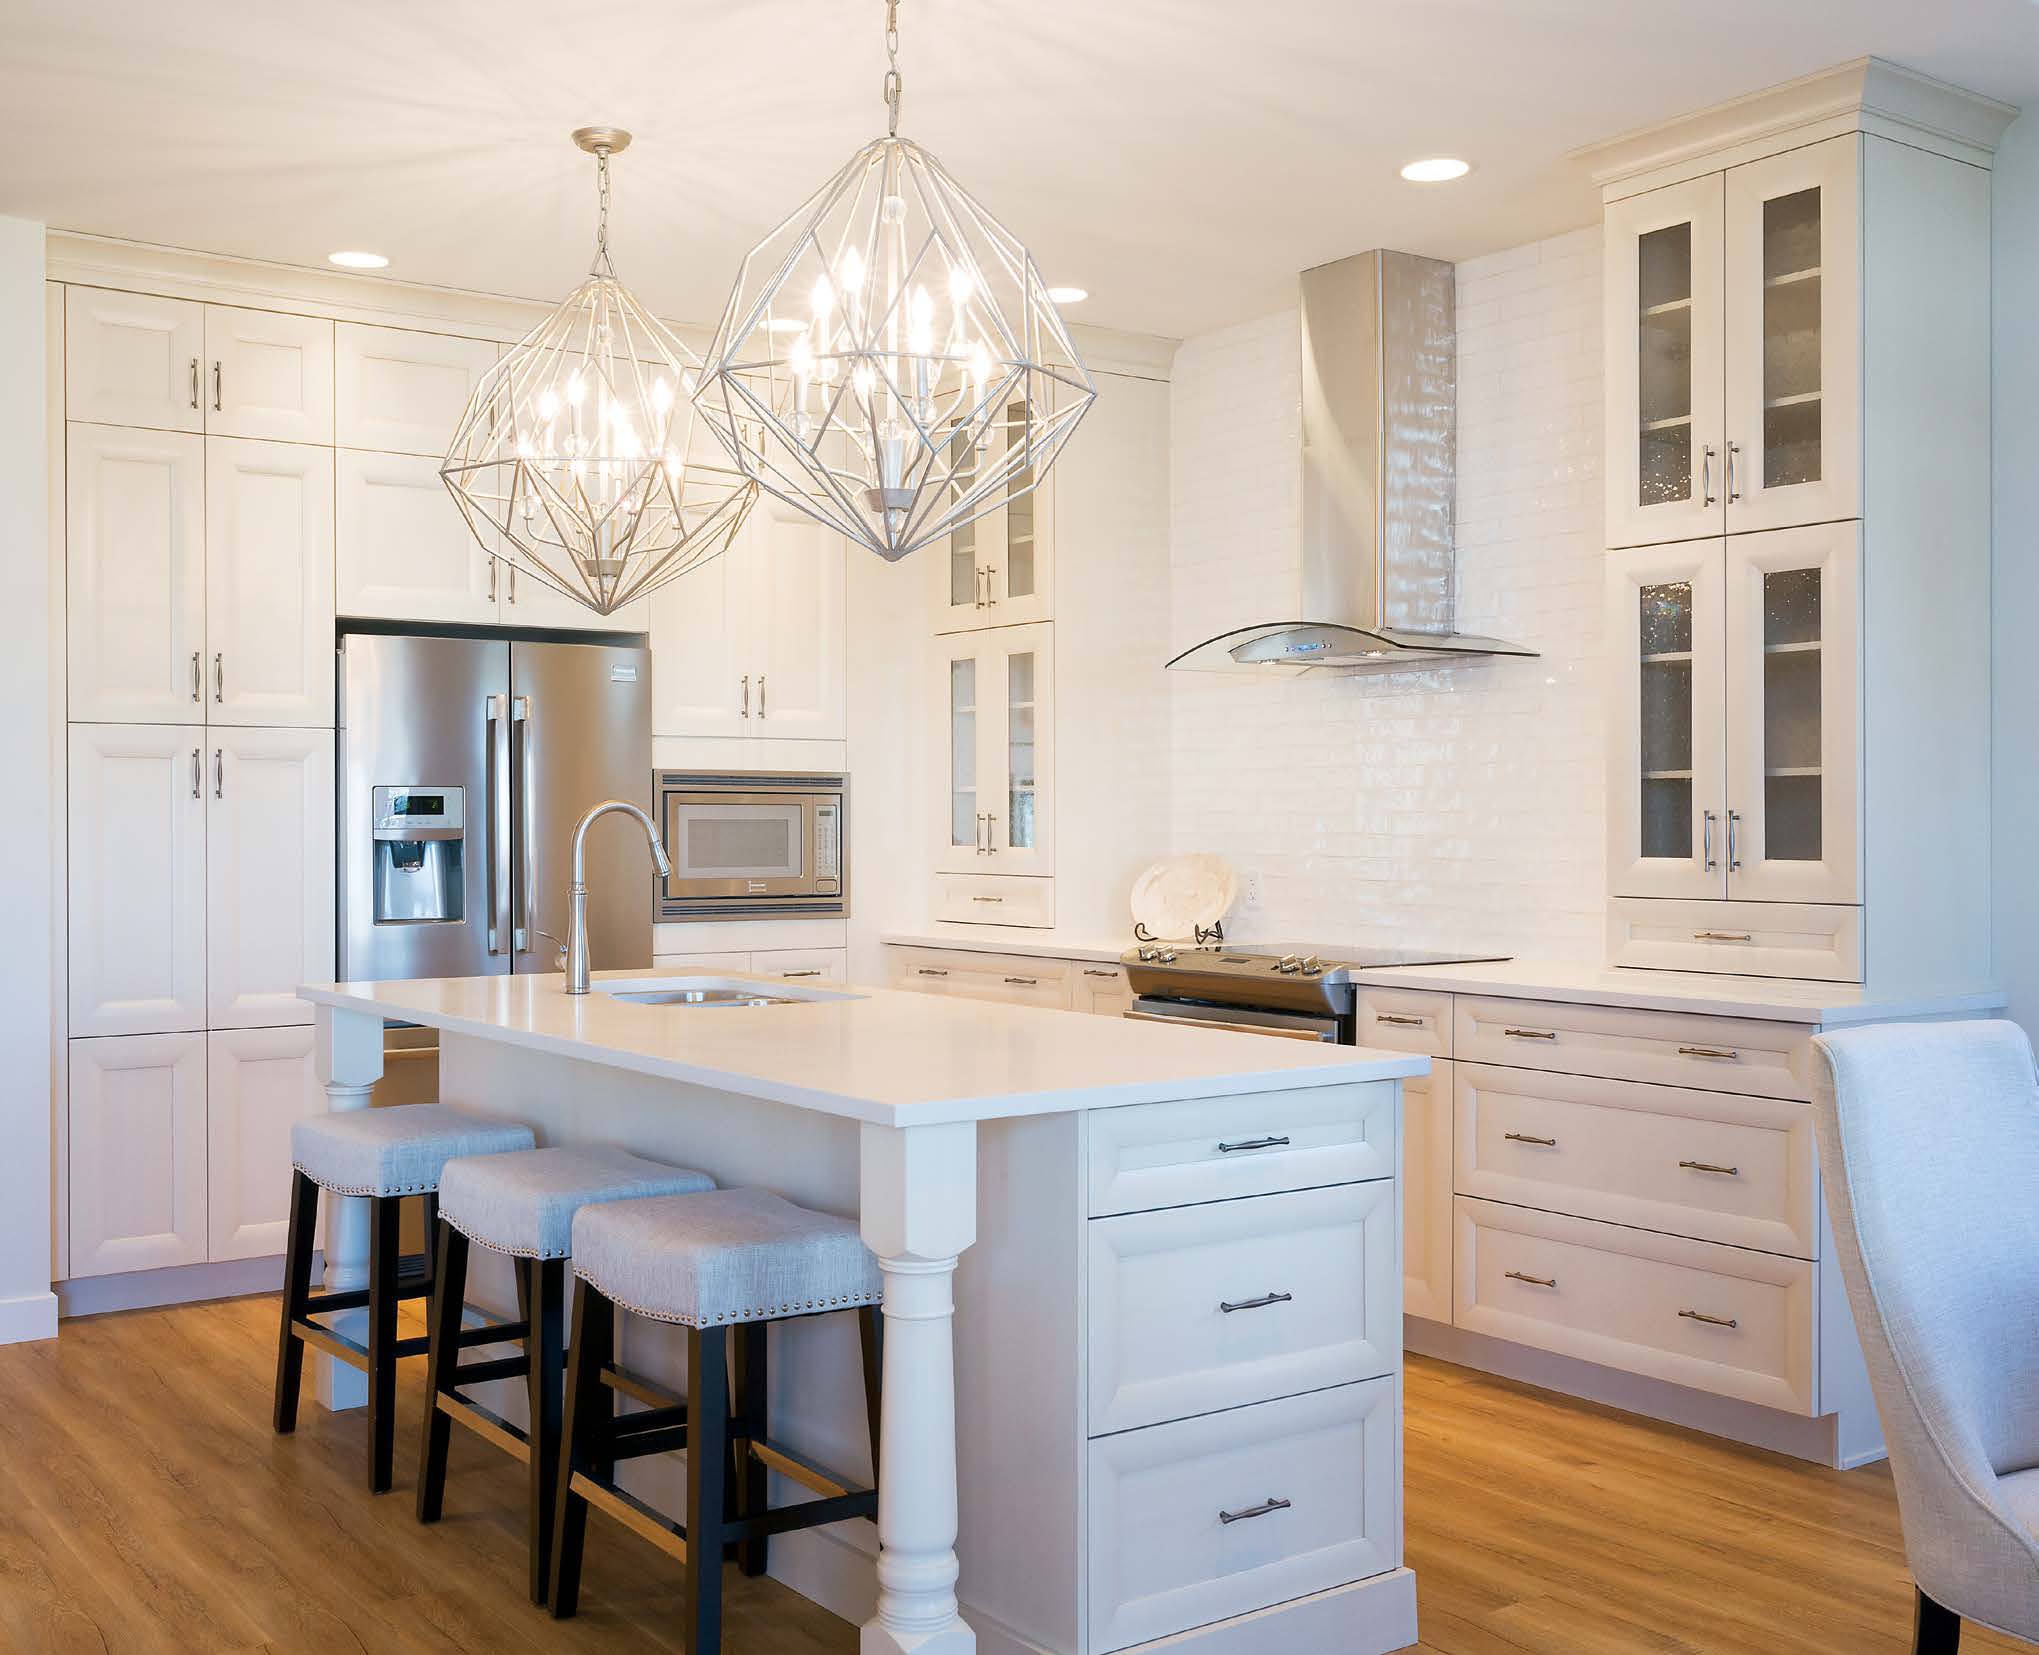 Vista all white kitchen cabinets with artistic lighting fixture